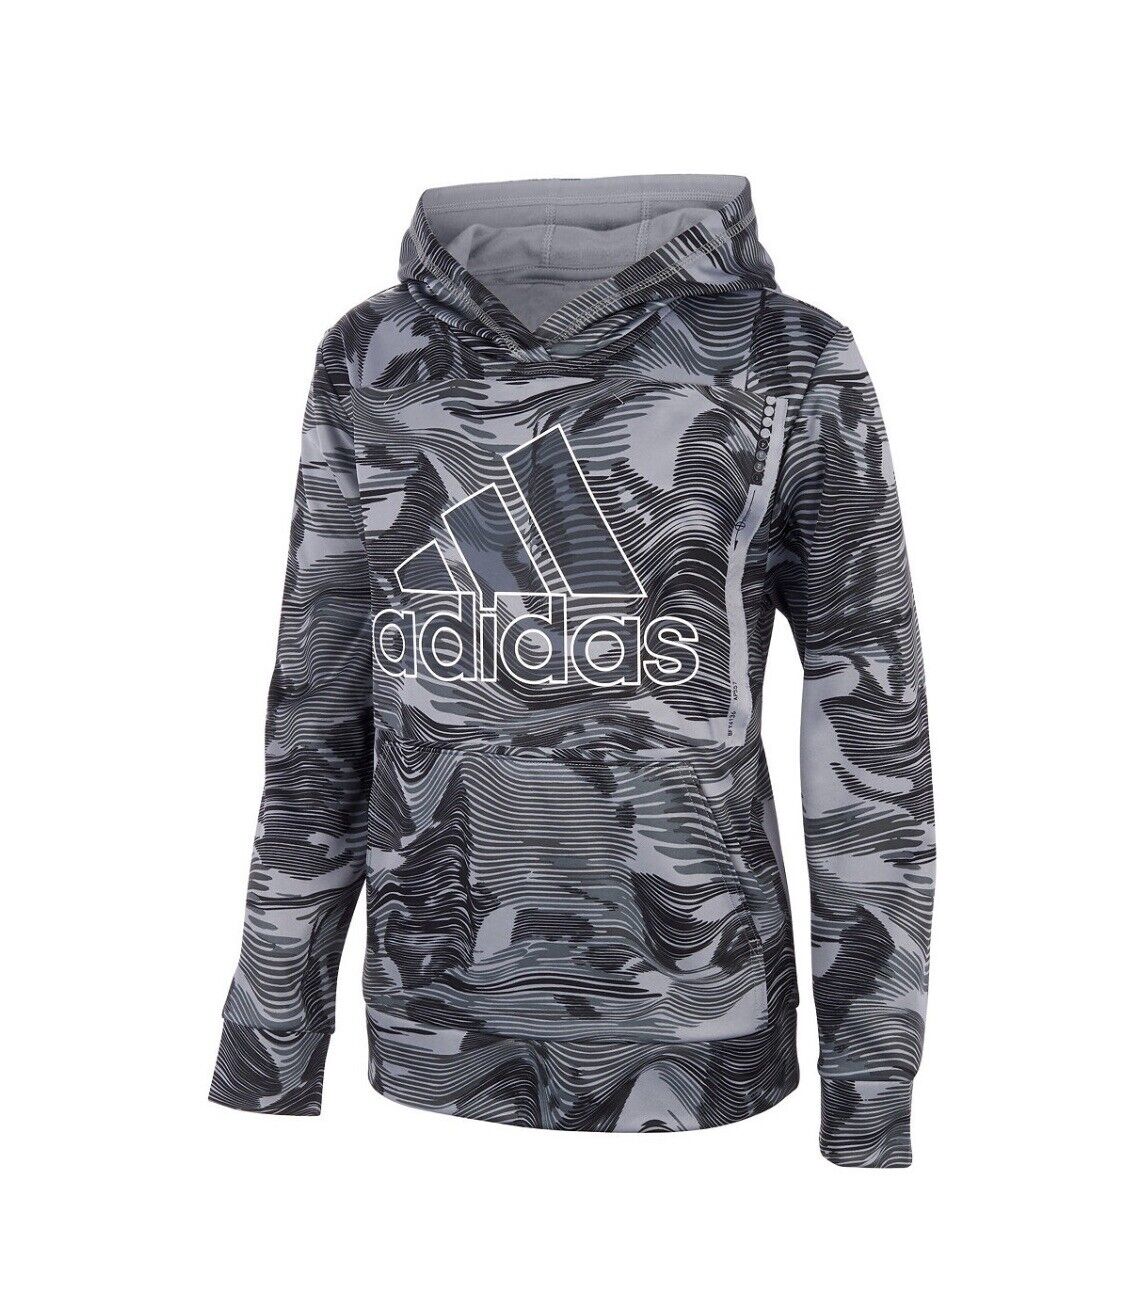 Large Adidas Big Boys Warp Camouflage All Over Print Pullover Hoodie Bnwts $45